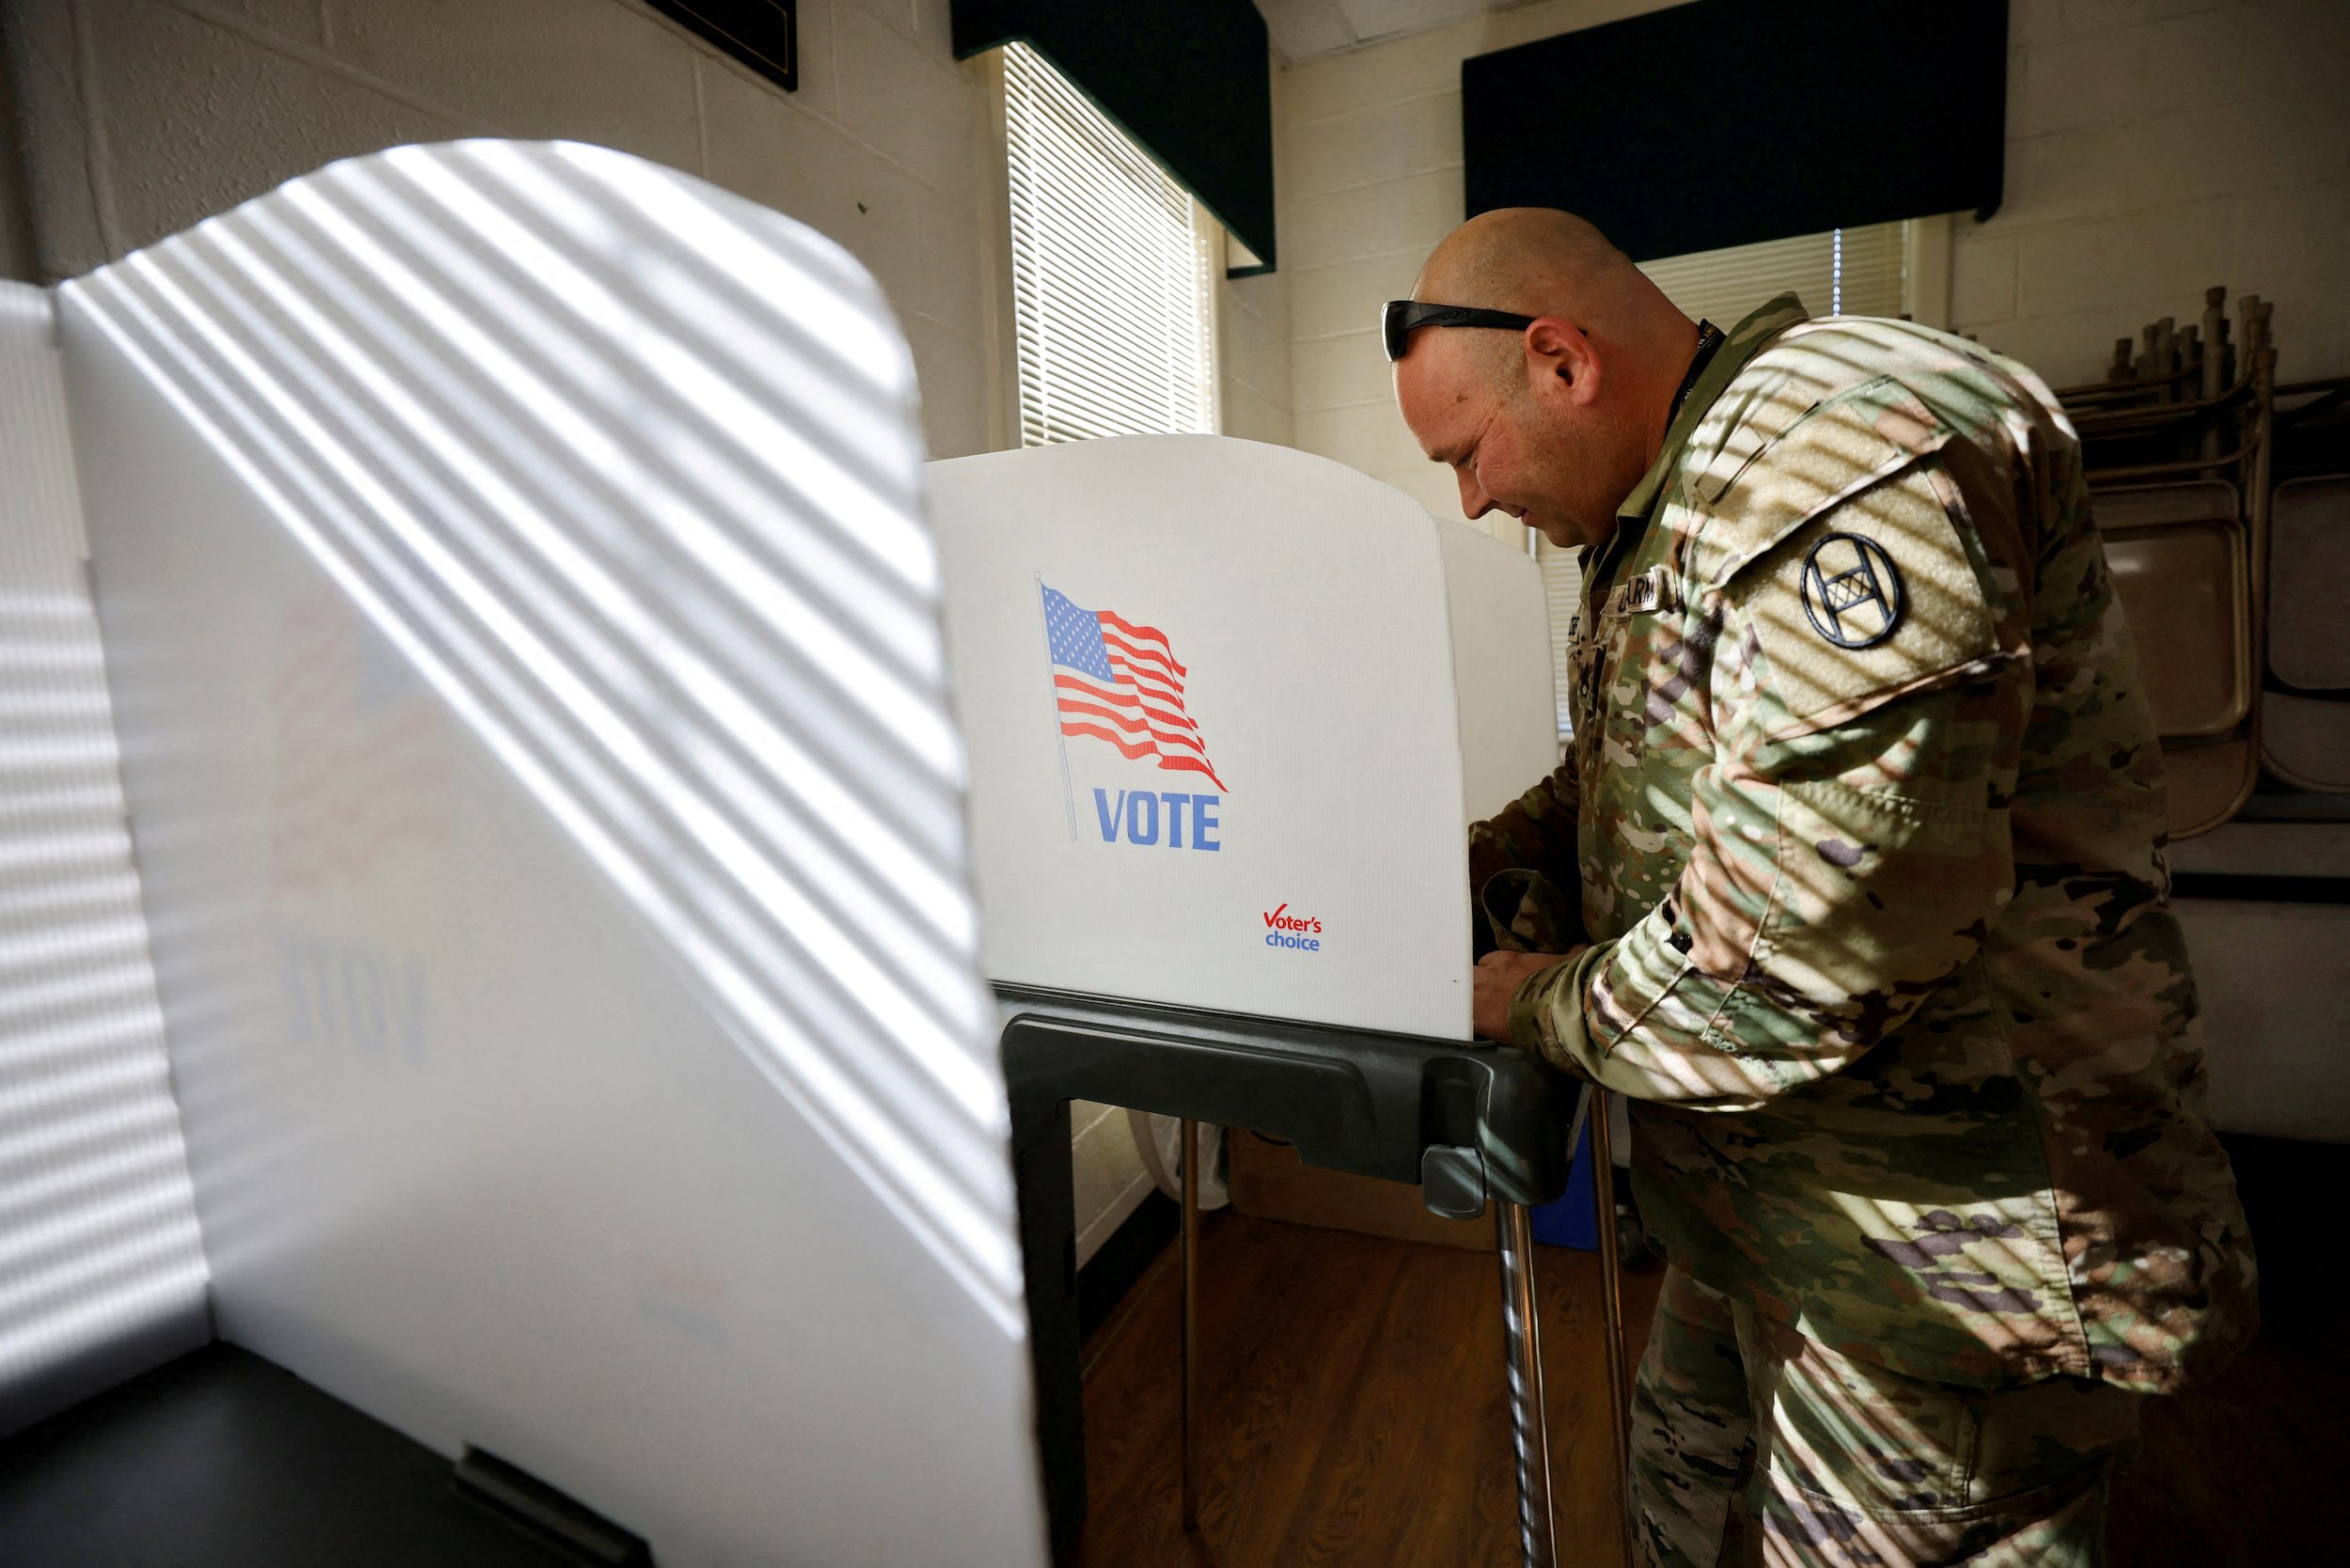 3 takeaways from the US midterm elections